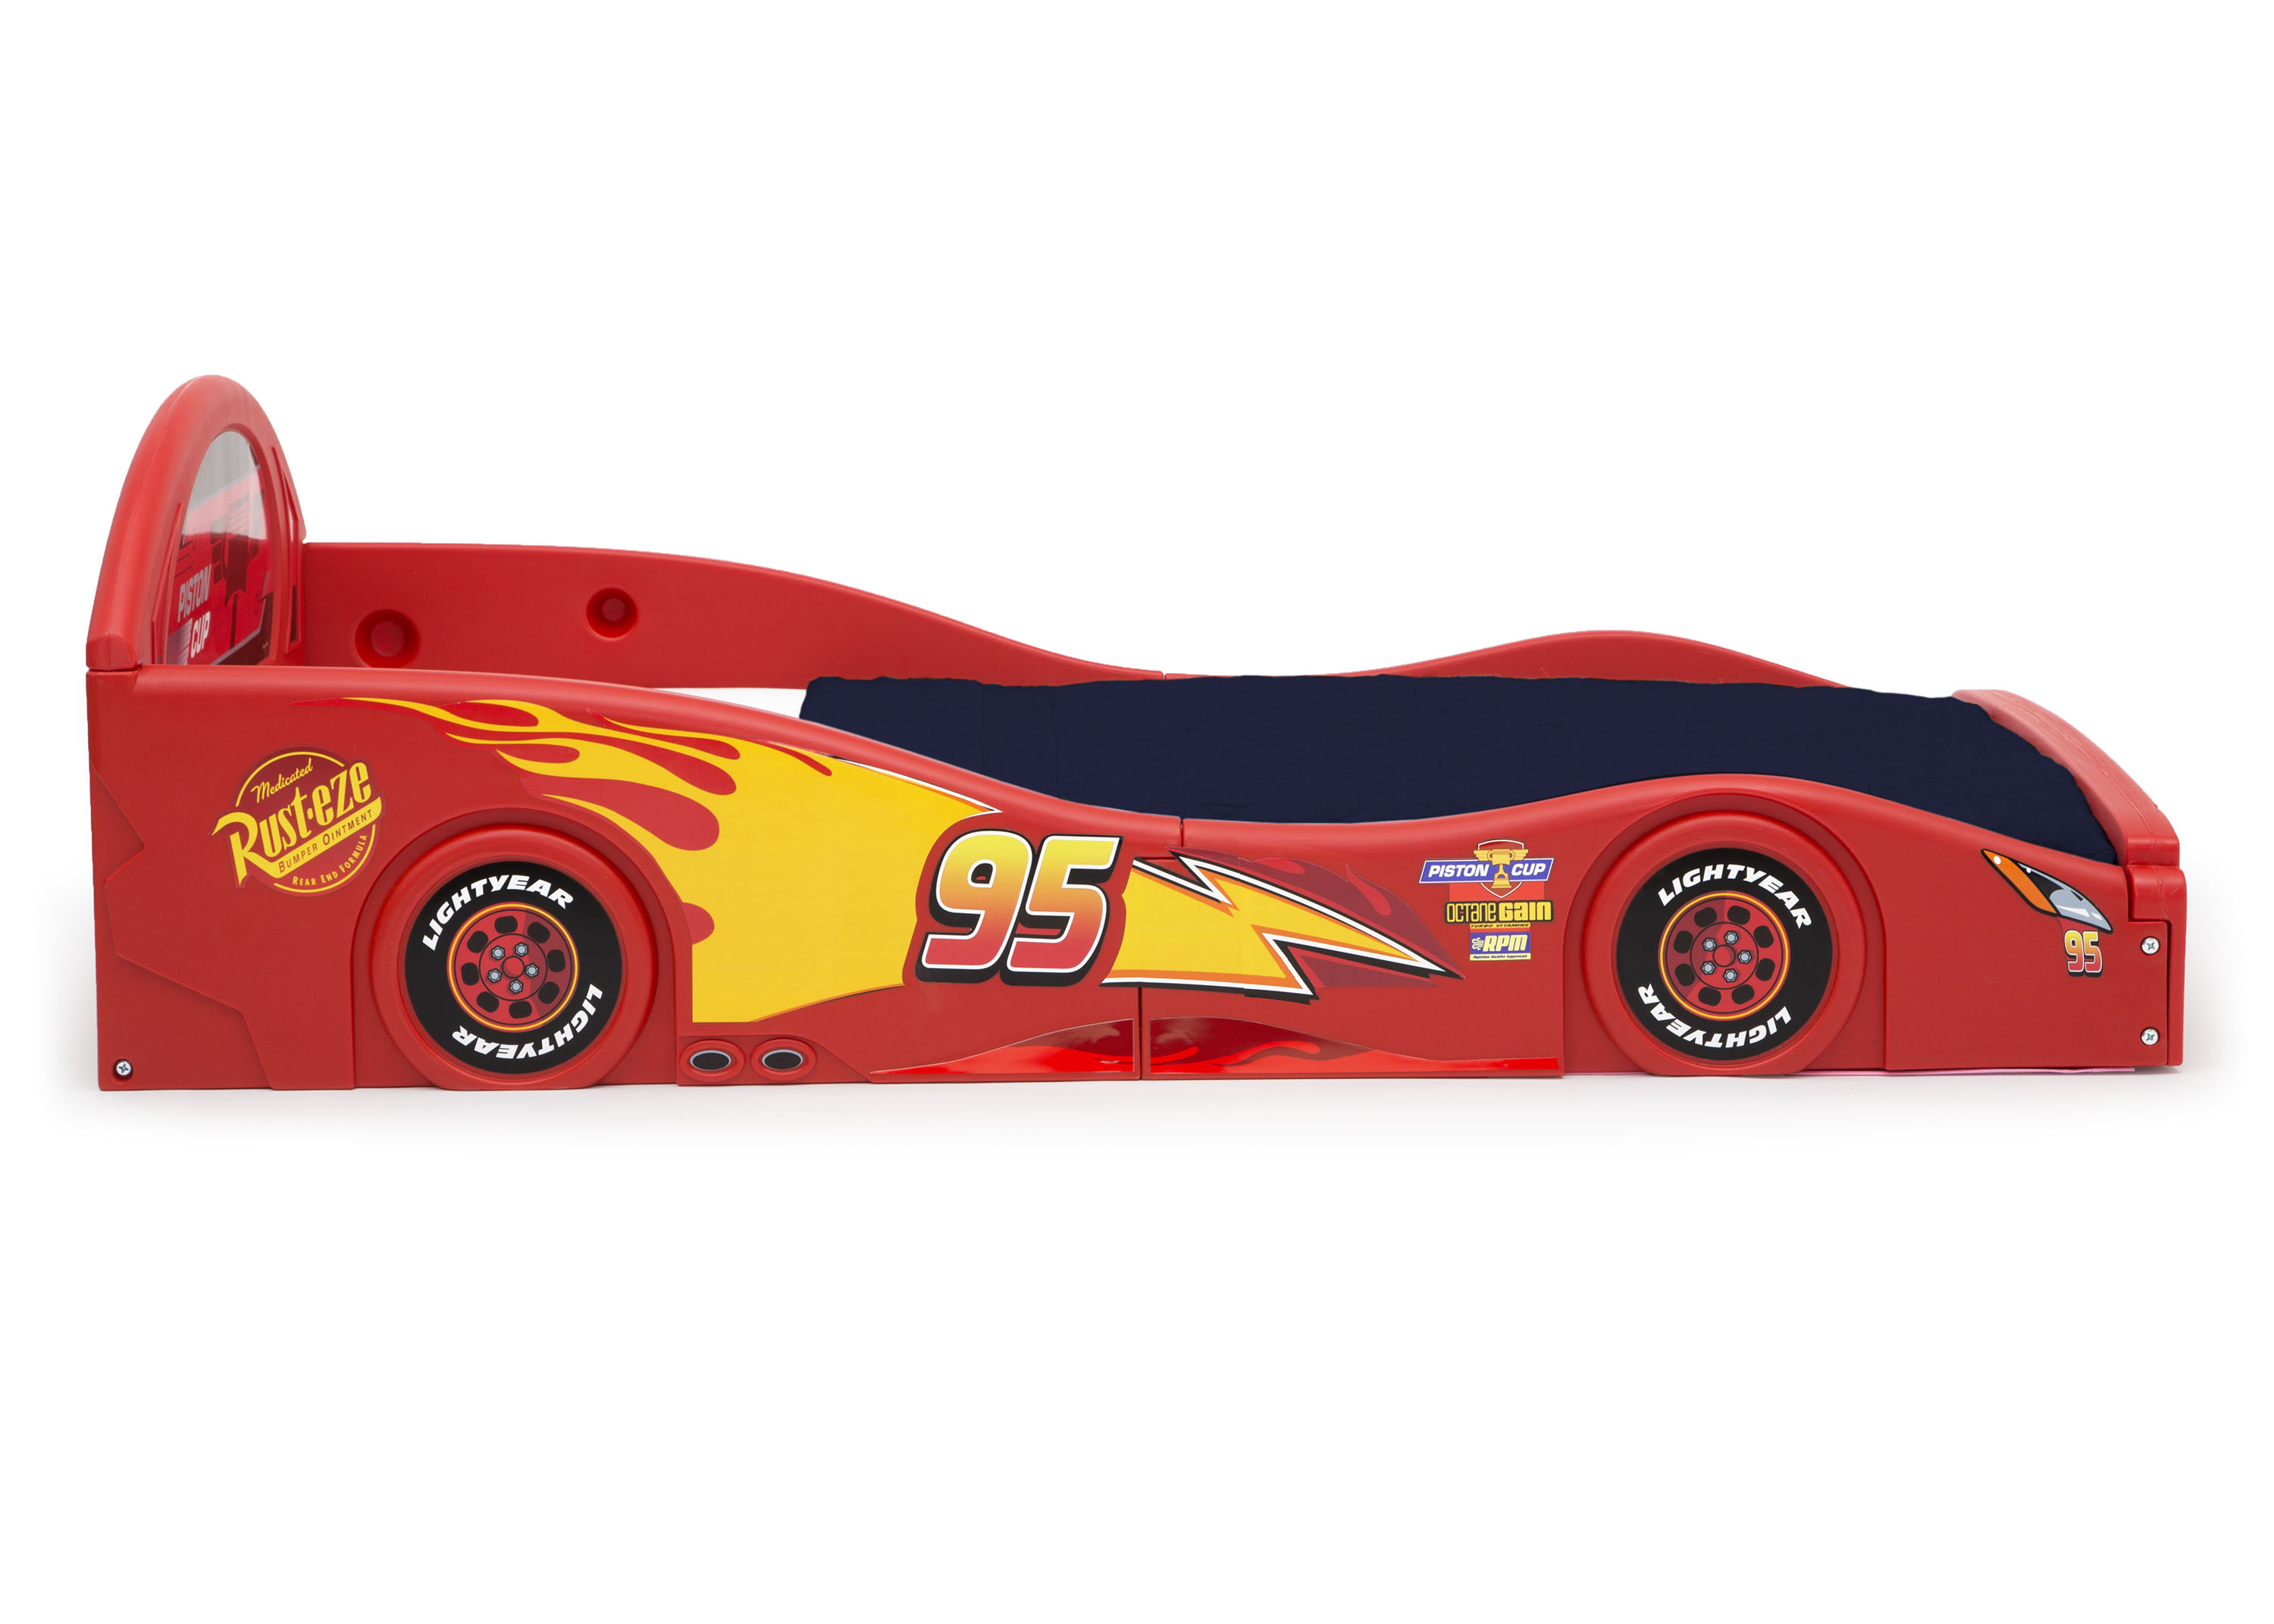 Disney Pixar Cars Lightning McQueen Plastic Sleep and Play Toddler Bed by Delta Children - image 5 of 6